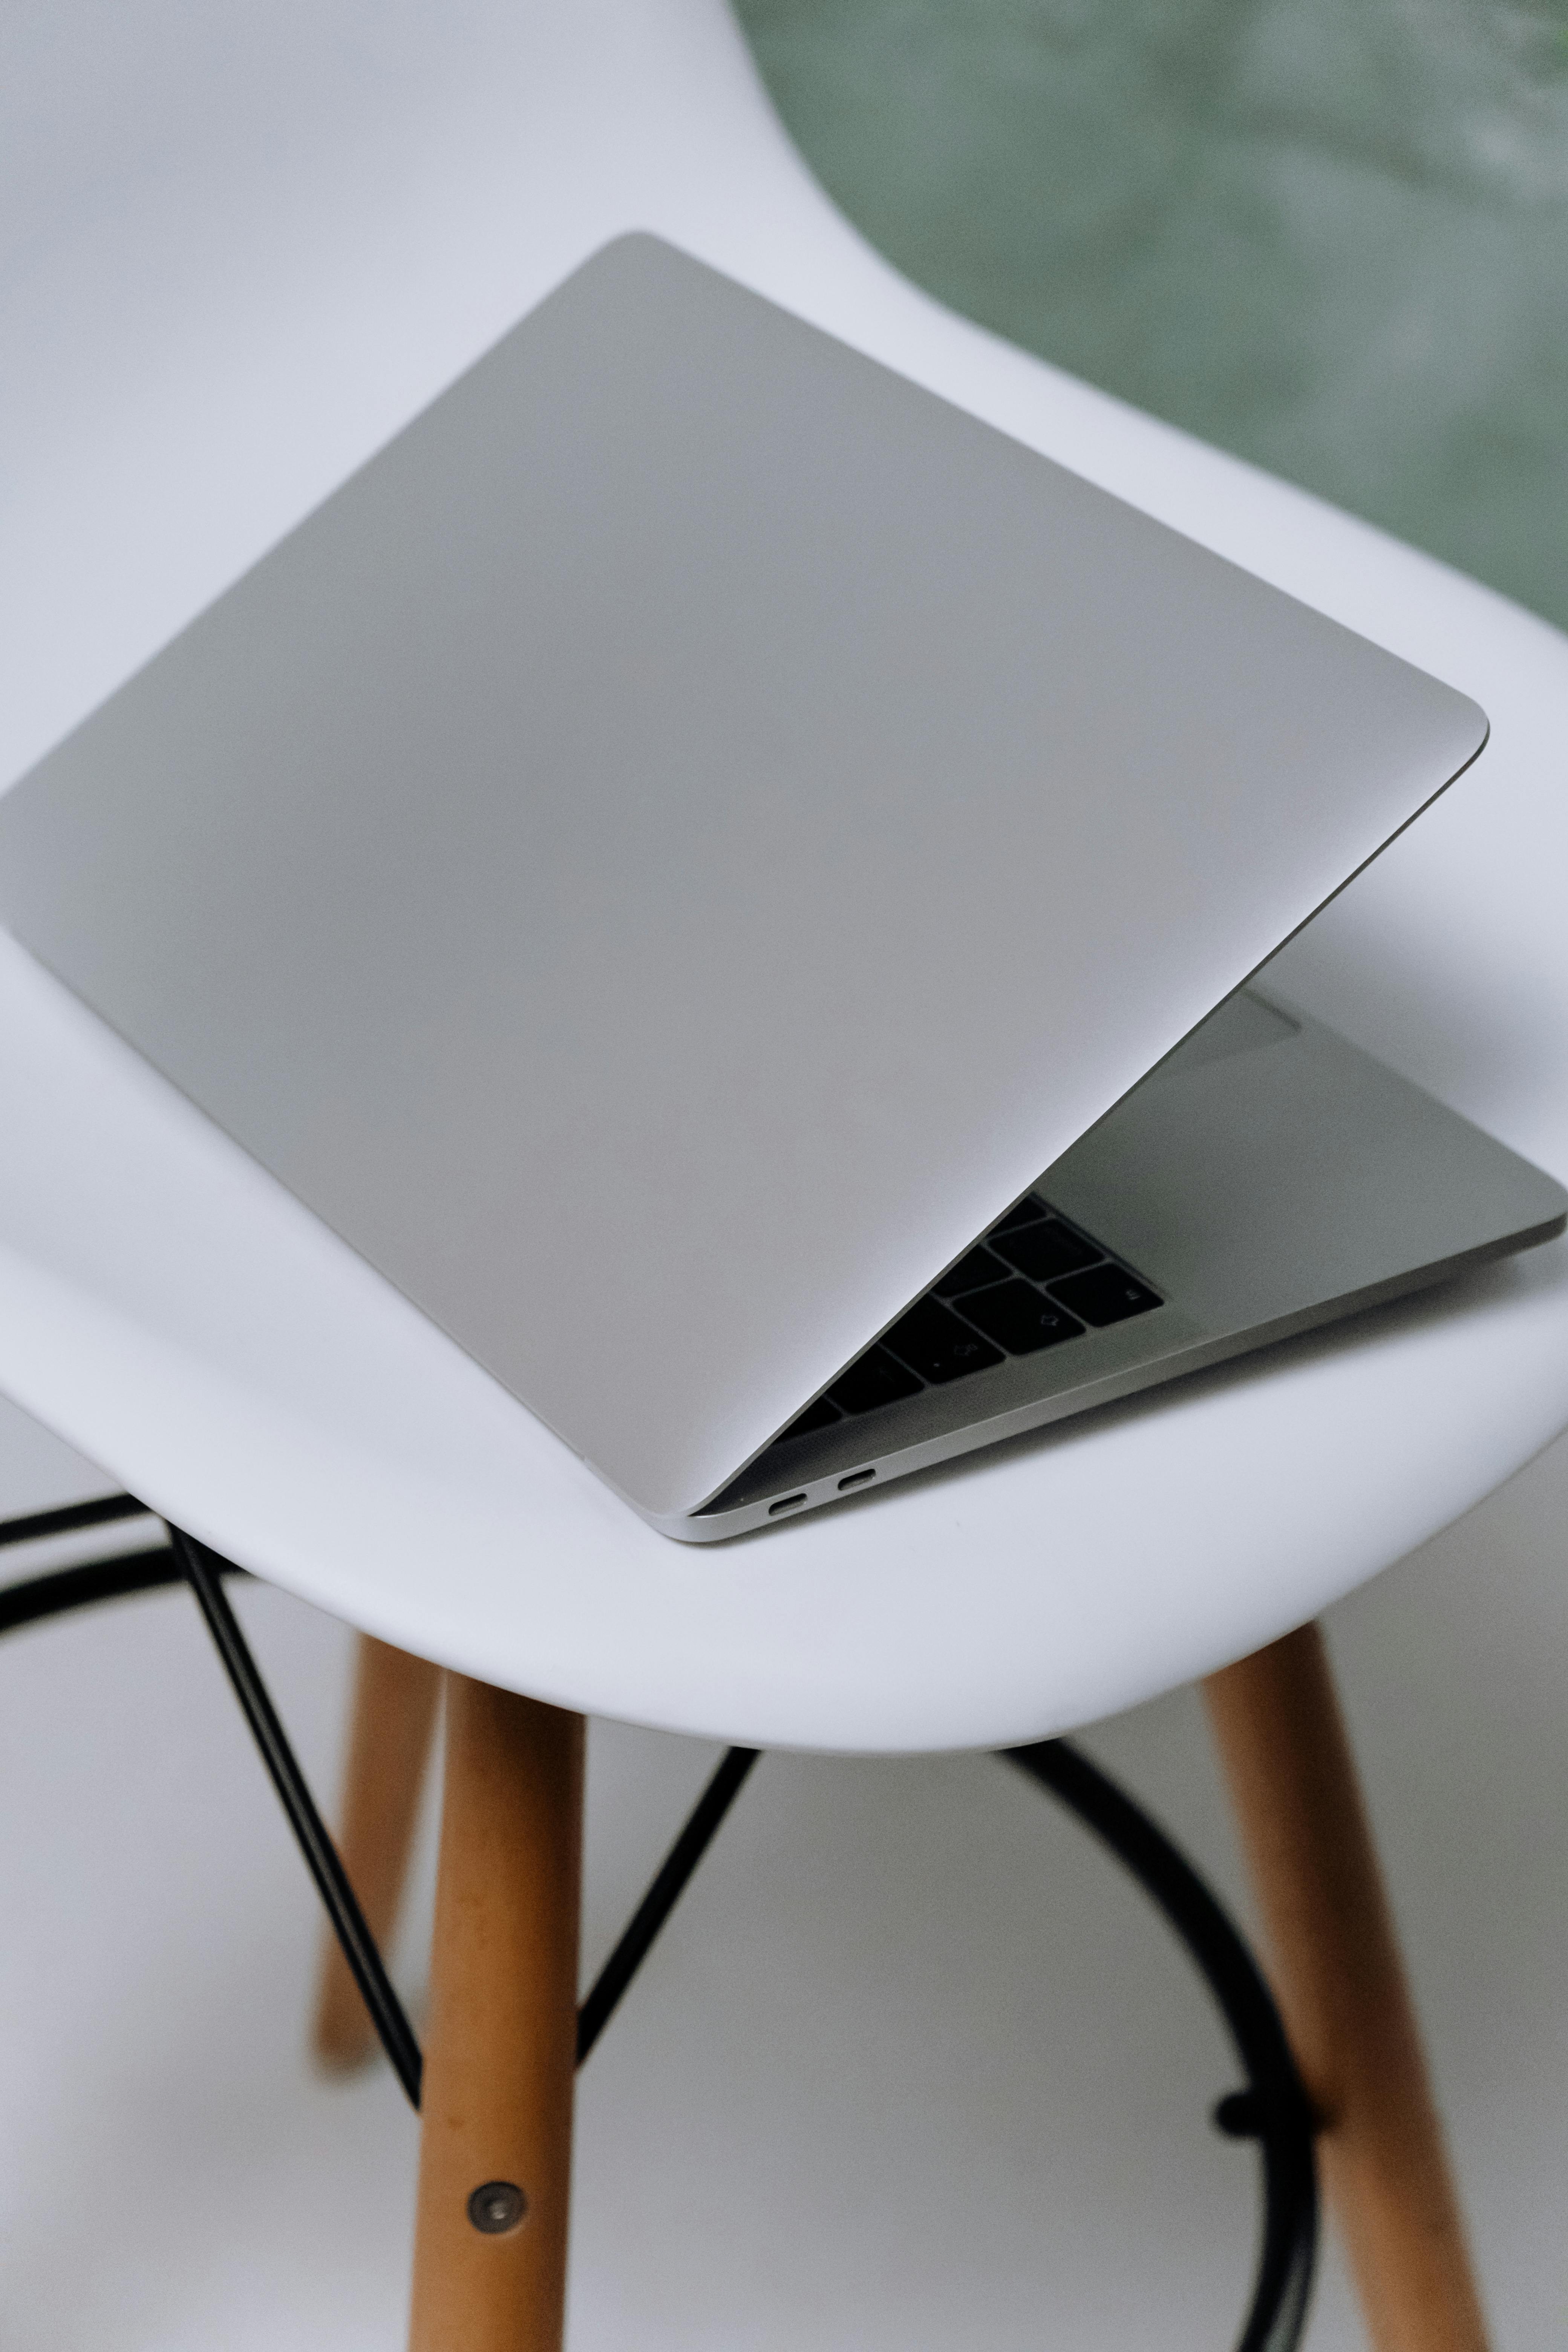 macbook air on white round table